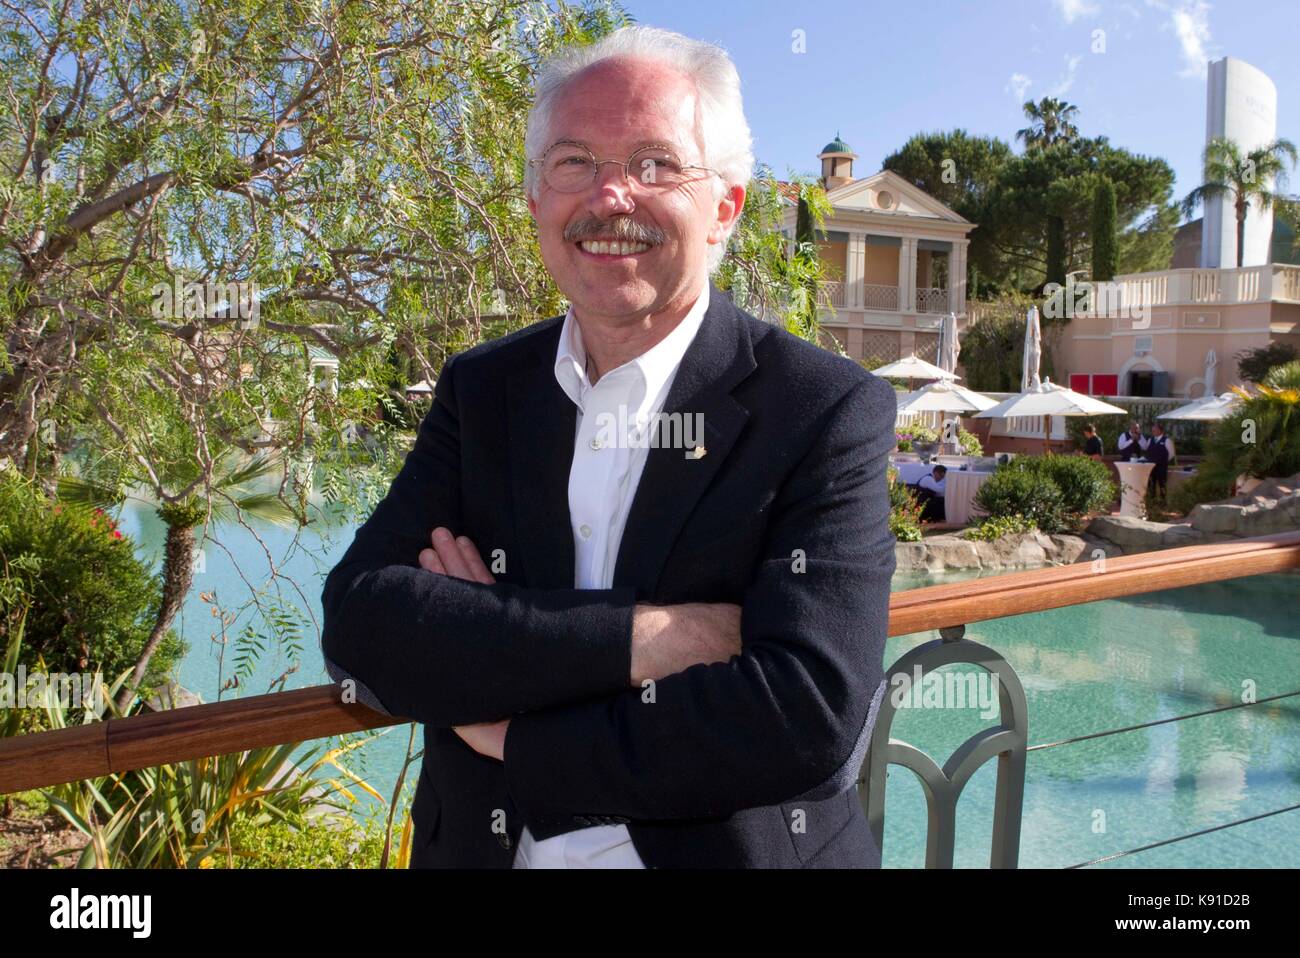 Monaco, Monaco. 23rd May, 2016. Monaco, Monte Carlo - May 23, 2016: Gourmet Chef Jacques Chibois from La Bastide Saint Antoine in Grasse at the Monte Carlo Bay Hotel and Resort/SBM | usage worldwide Credit: dpa/Alamy Live News Stock Photo